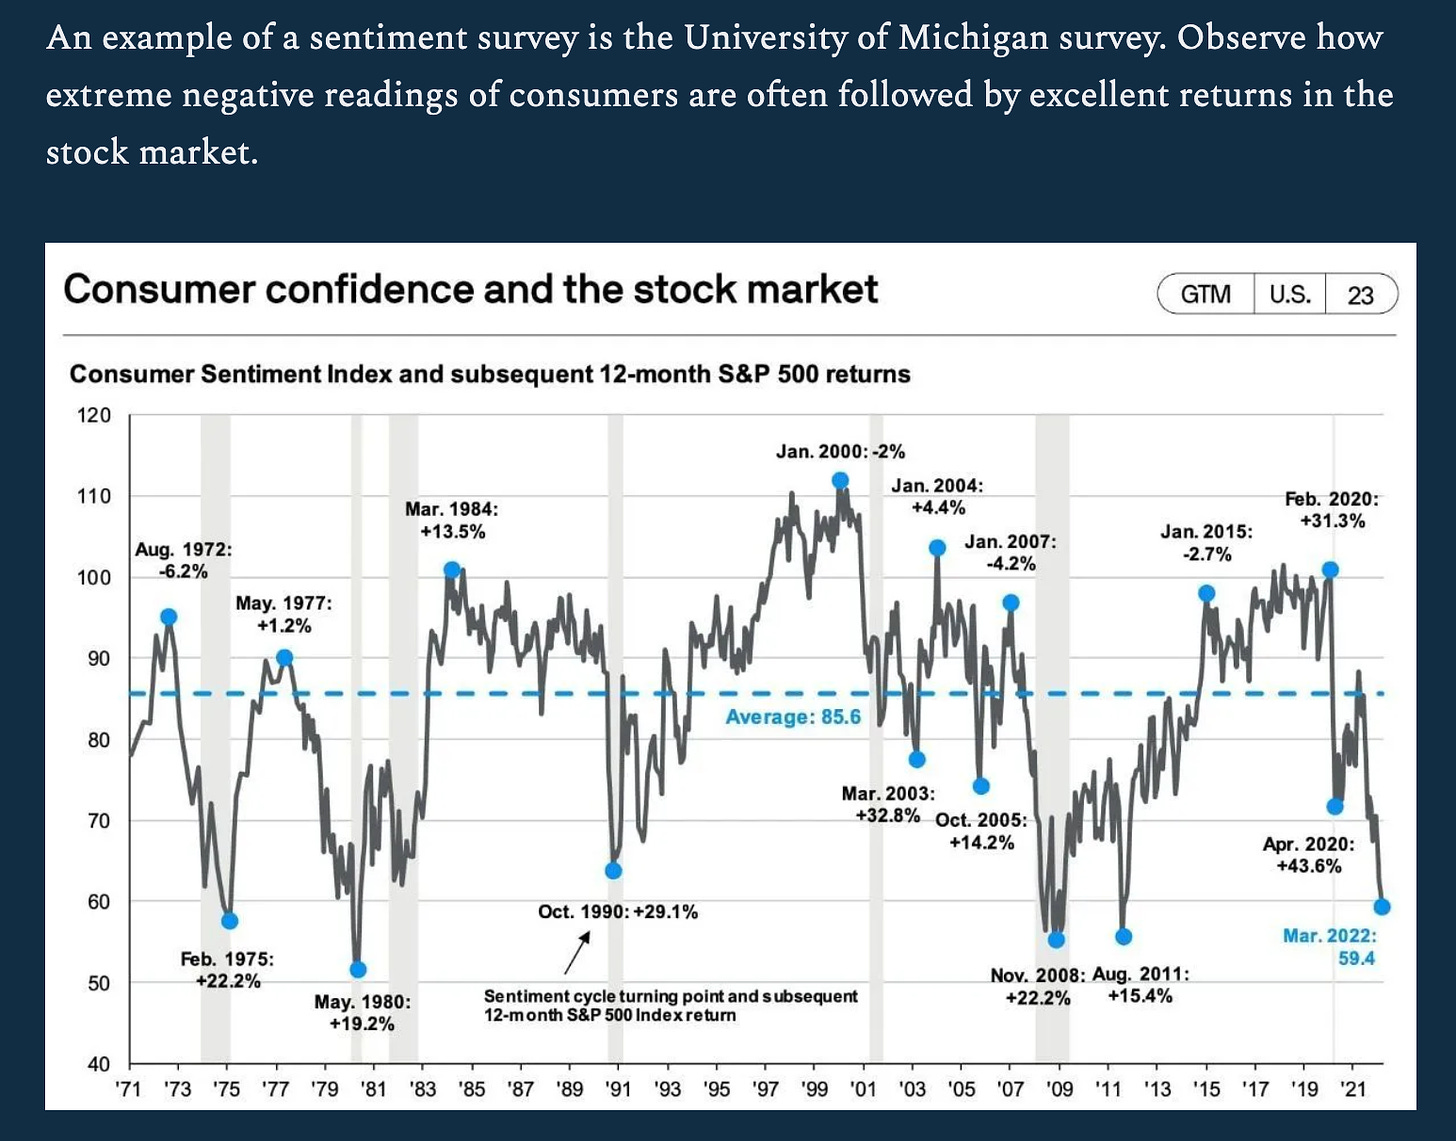 An example of a sentiment survey is the University of Michigan survey. Observe how 
extreme negative readings of consumers are often followed by excellent returns in the 
Nov. 2008: Aug. 2011 • 
stock market. 
Consumer confidence and the stock market 
Consumer Sentiment Index and subsequent 12-month S&P 500 retums 
GTM 
Jan. 2015: 
-2.7% 
+154% 
U.S. 
23 
120 
110 
Mar. 1984: 
+13.5% 
Aug. 1972: 
100 
90 
80 
70 
60 
50 
40 
'71 
-6.2% 
May. 1977: 
Feb. 1975: 
+22.2% 
Jan. 
Jan. 2004: 
+4.4% 
Jan. 2007: 
-4.2% 
Average: 85.6 
Mar. 2003: 
+32.80KOct. 2005: 
+14.2 % 
Feb. 20203 
+31.3% 
Apr. 2020: 
Mar. 2022: 
'73 
'77 
May. 1980: 
+192% 
'79 '81 '83 
Oct. 1990:+29.1% 
Se ntiment cycle point and s Ibsequent 
12-m ontl S&P 500 Index rewrn 
'85 '87 '89 '91 '93 '95 '97 '99 '01 
'03 
'05 
+22.2% 
'07 '09 
'11 
'13 
'15 
'17 
'19 
594 
'21 